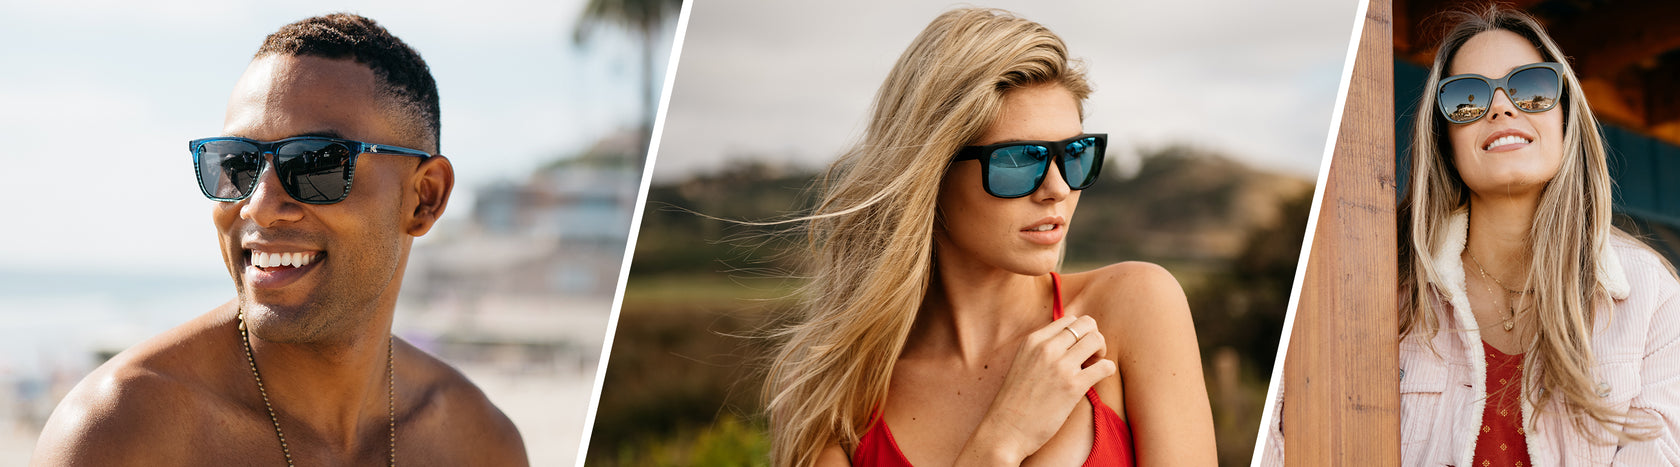 Two women and a man wearing Knockaround sunglasses